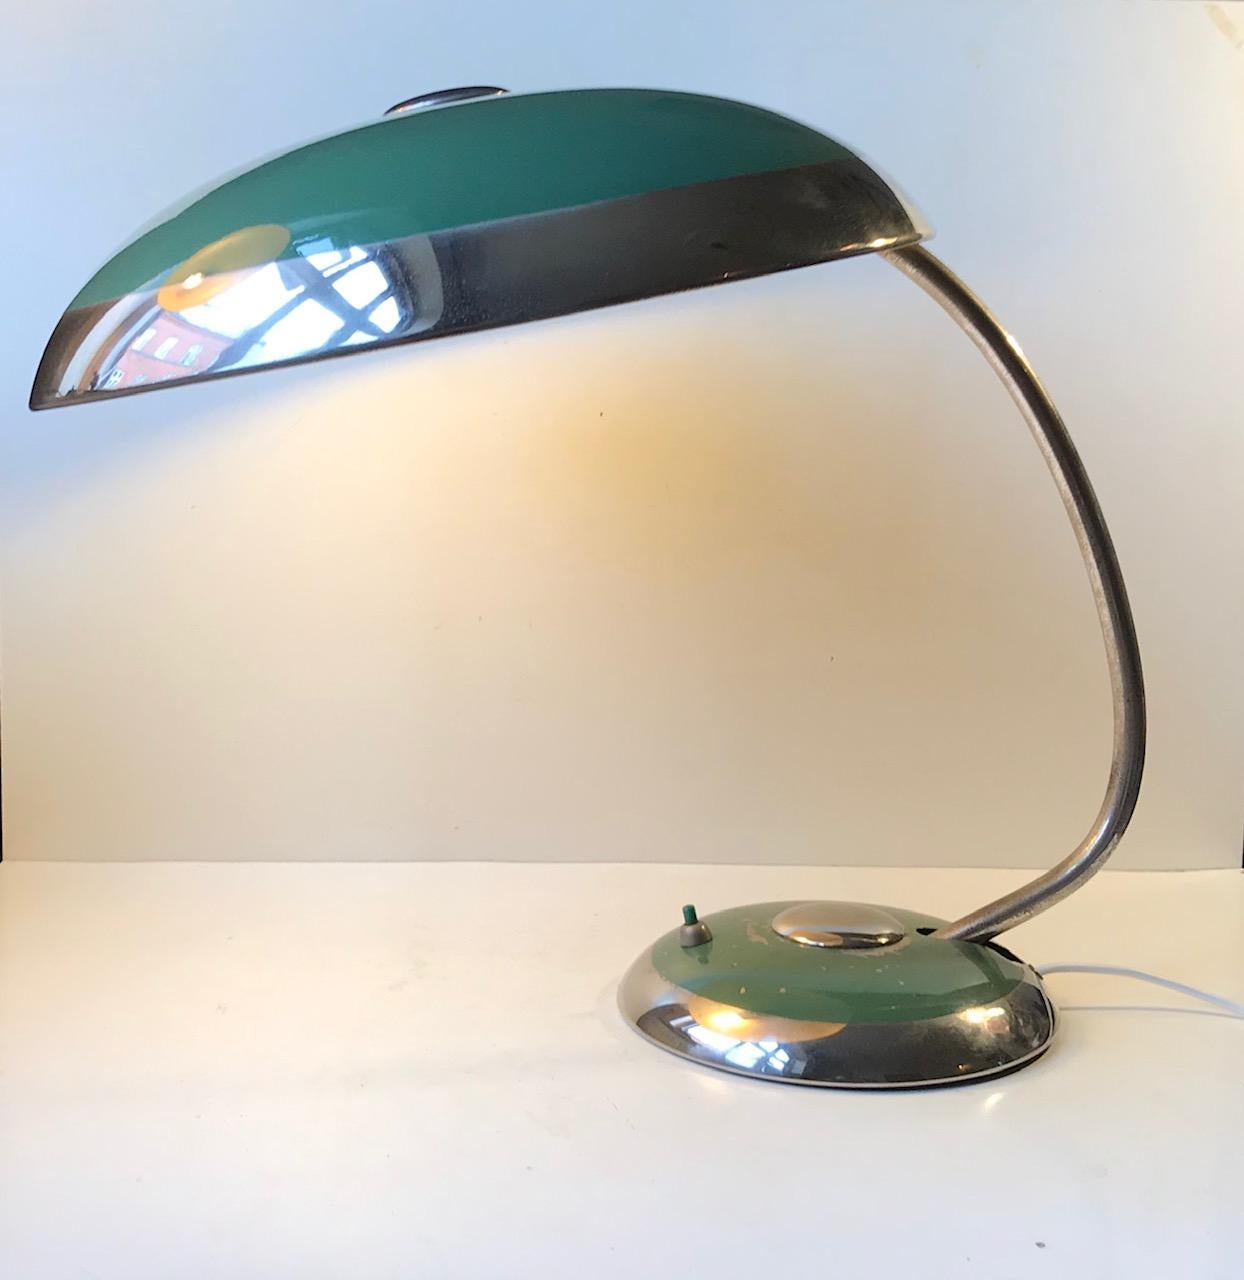 Original unrestored Bauhaus desk/table lamp by Helo Leuchten. 
Beautiful green exterior with accents in polished aluminum. This version of the large Helo's are by far the rarest as most of them were made with brass accents. The stem is adjustable